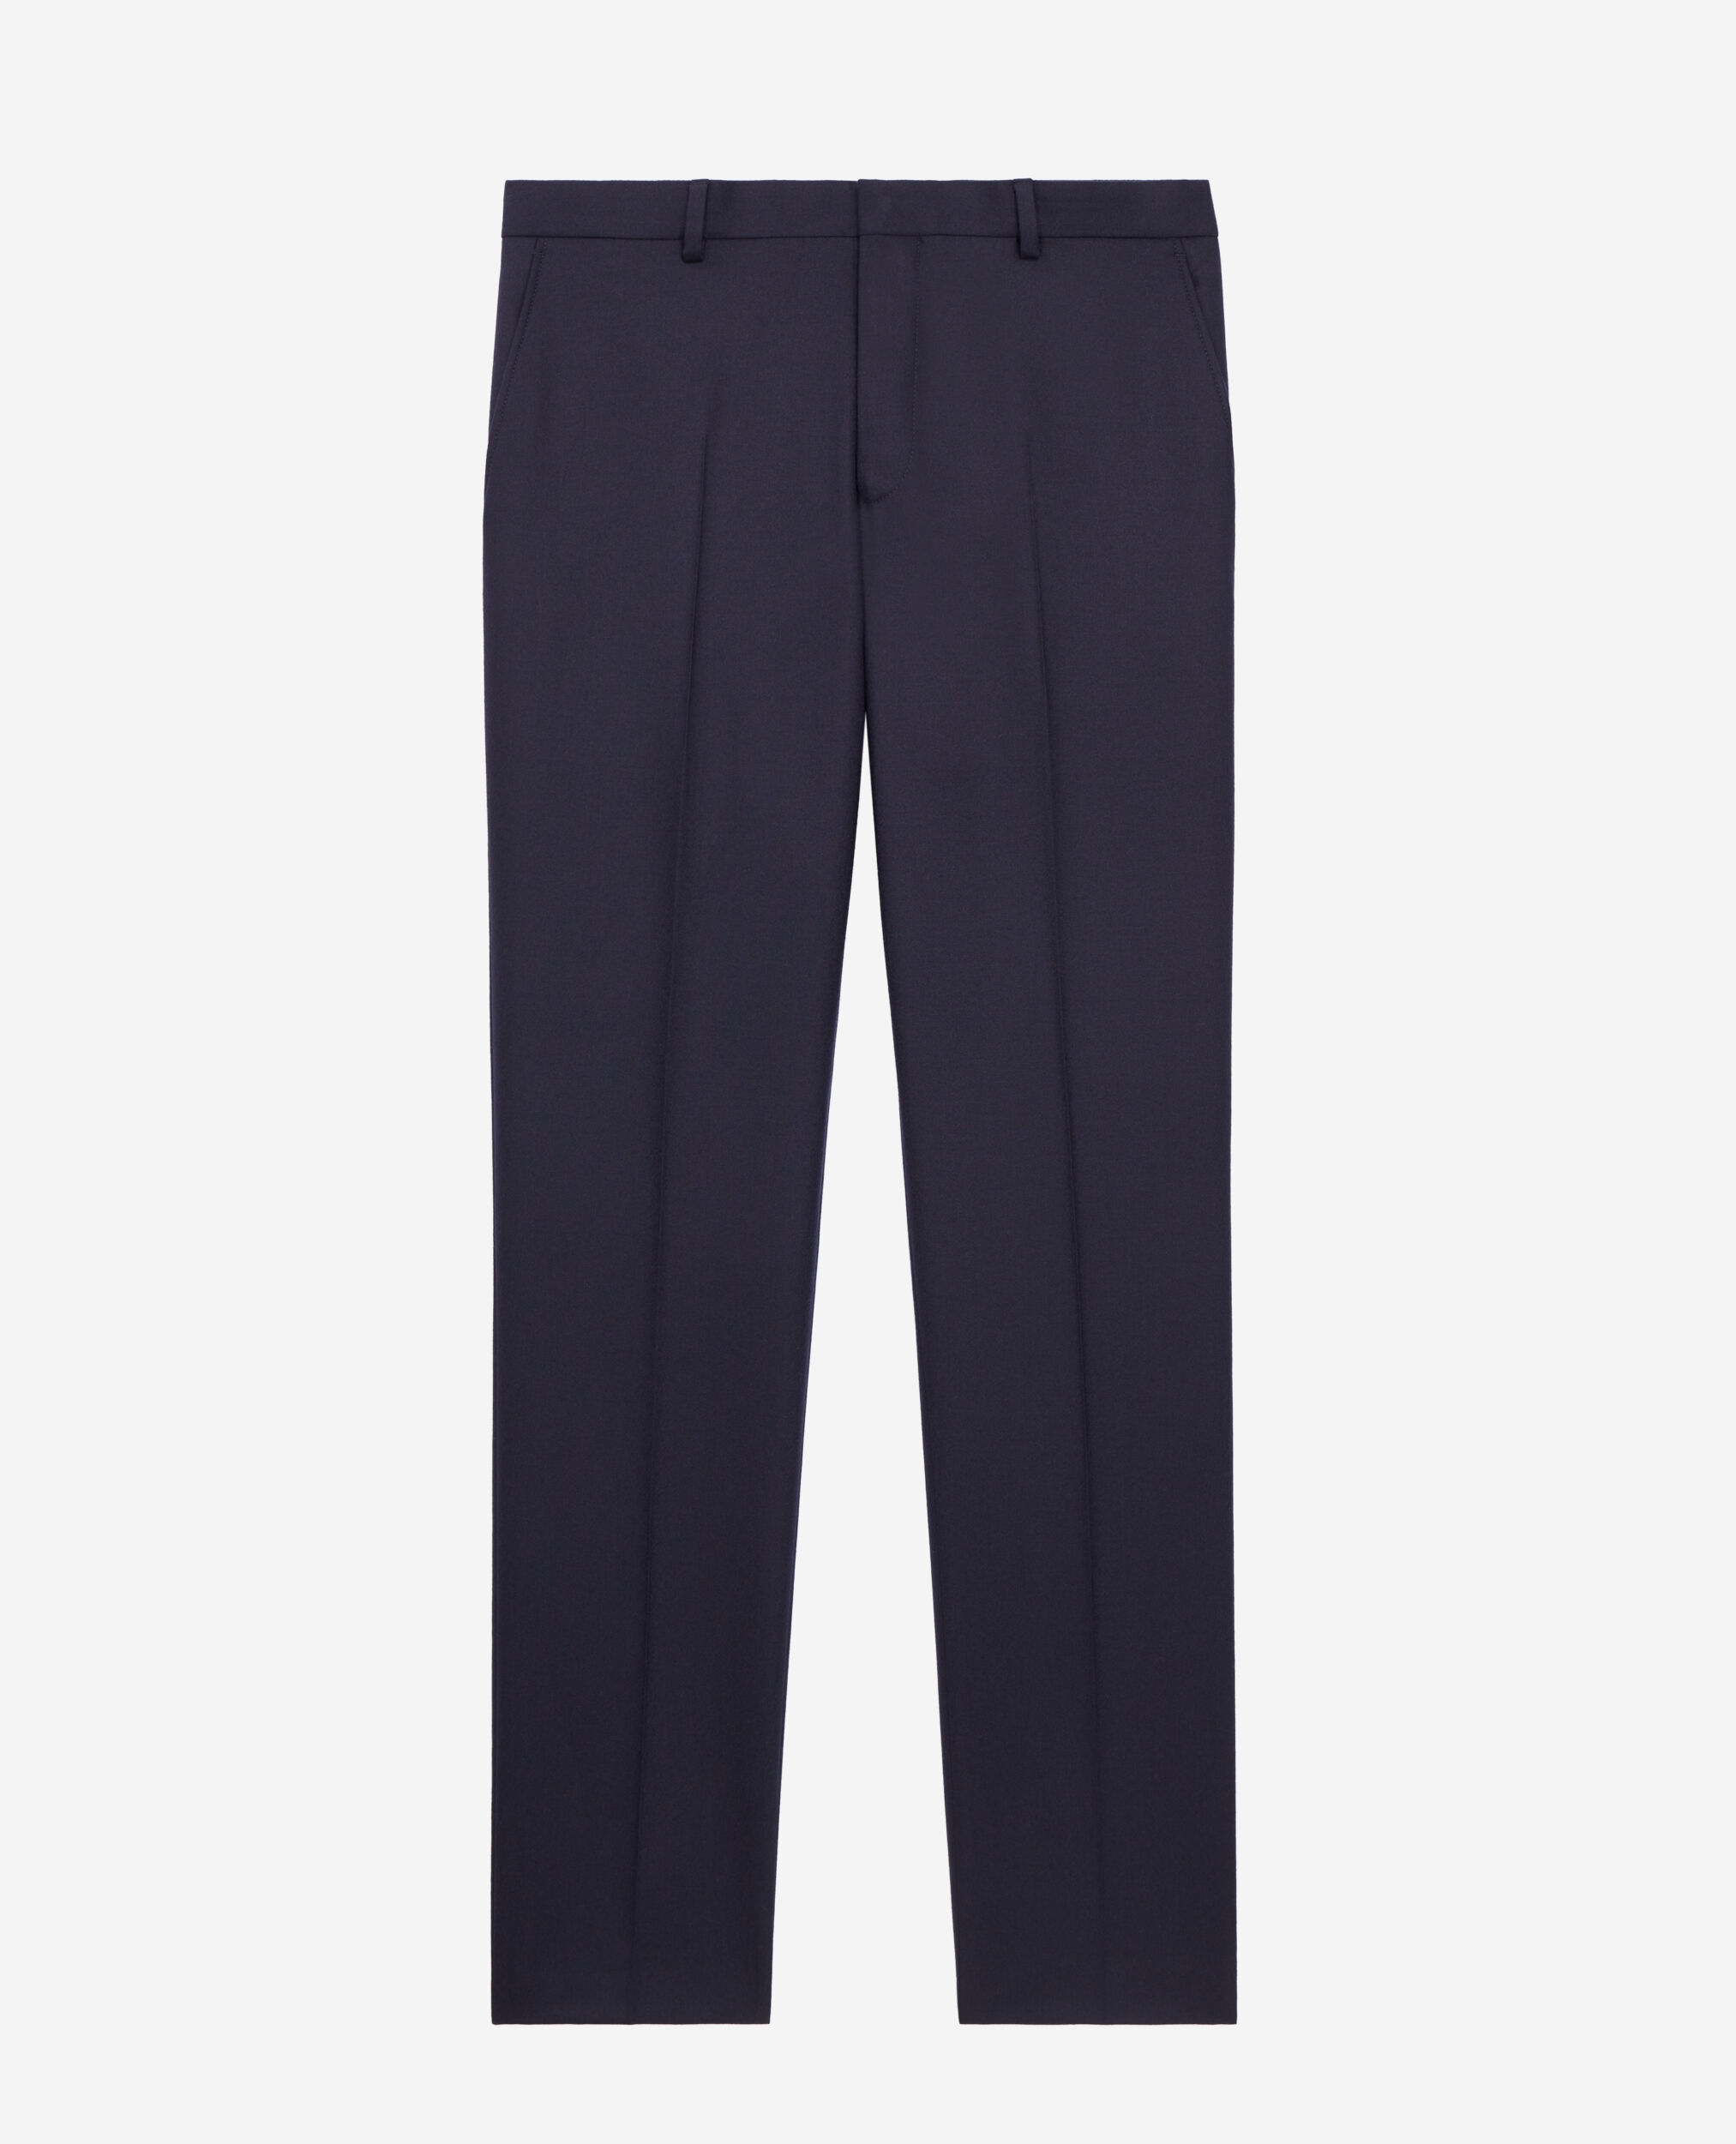 Blue navy flannel suit trousers, NAVY, hi-res image number null